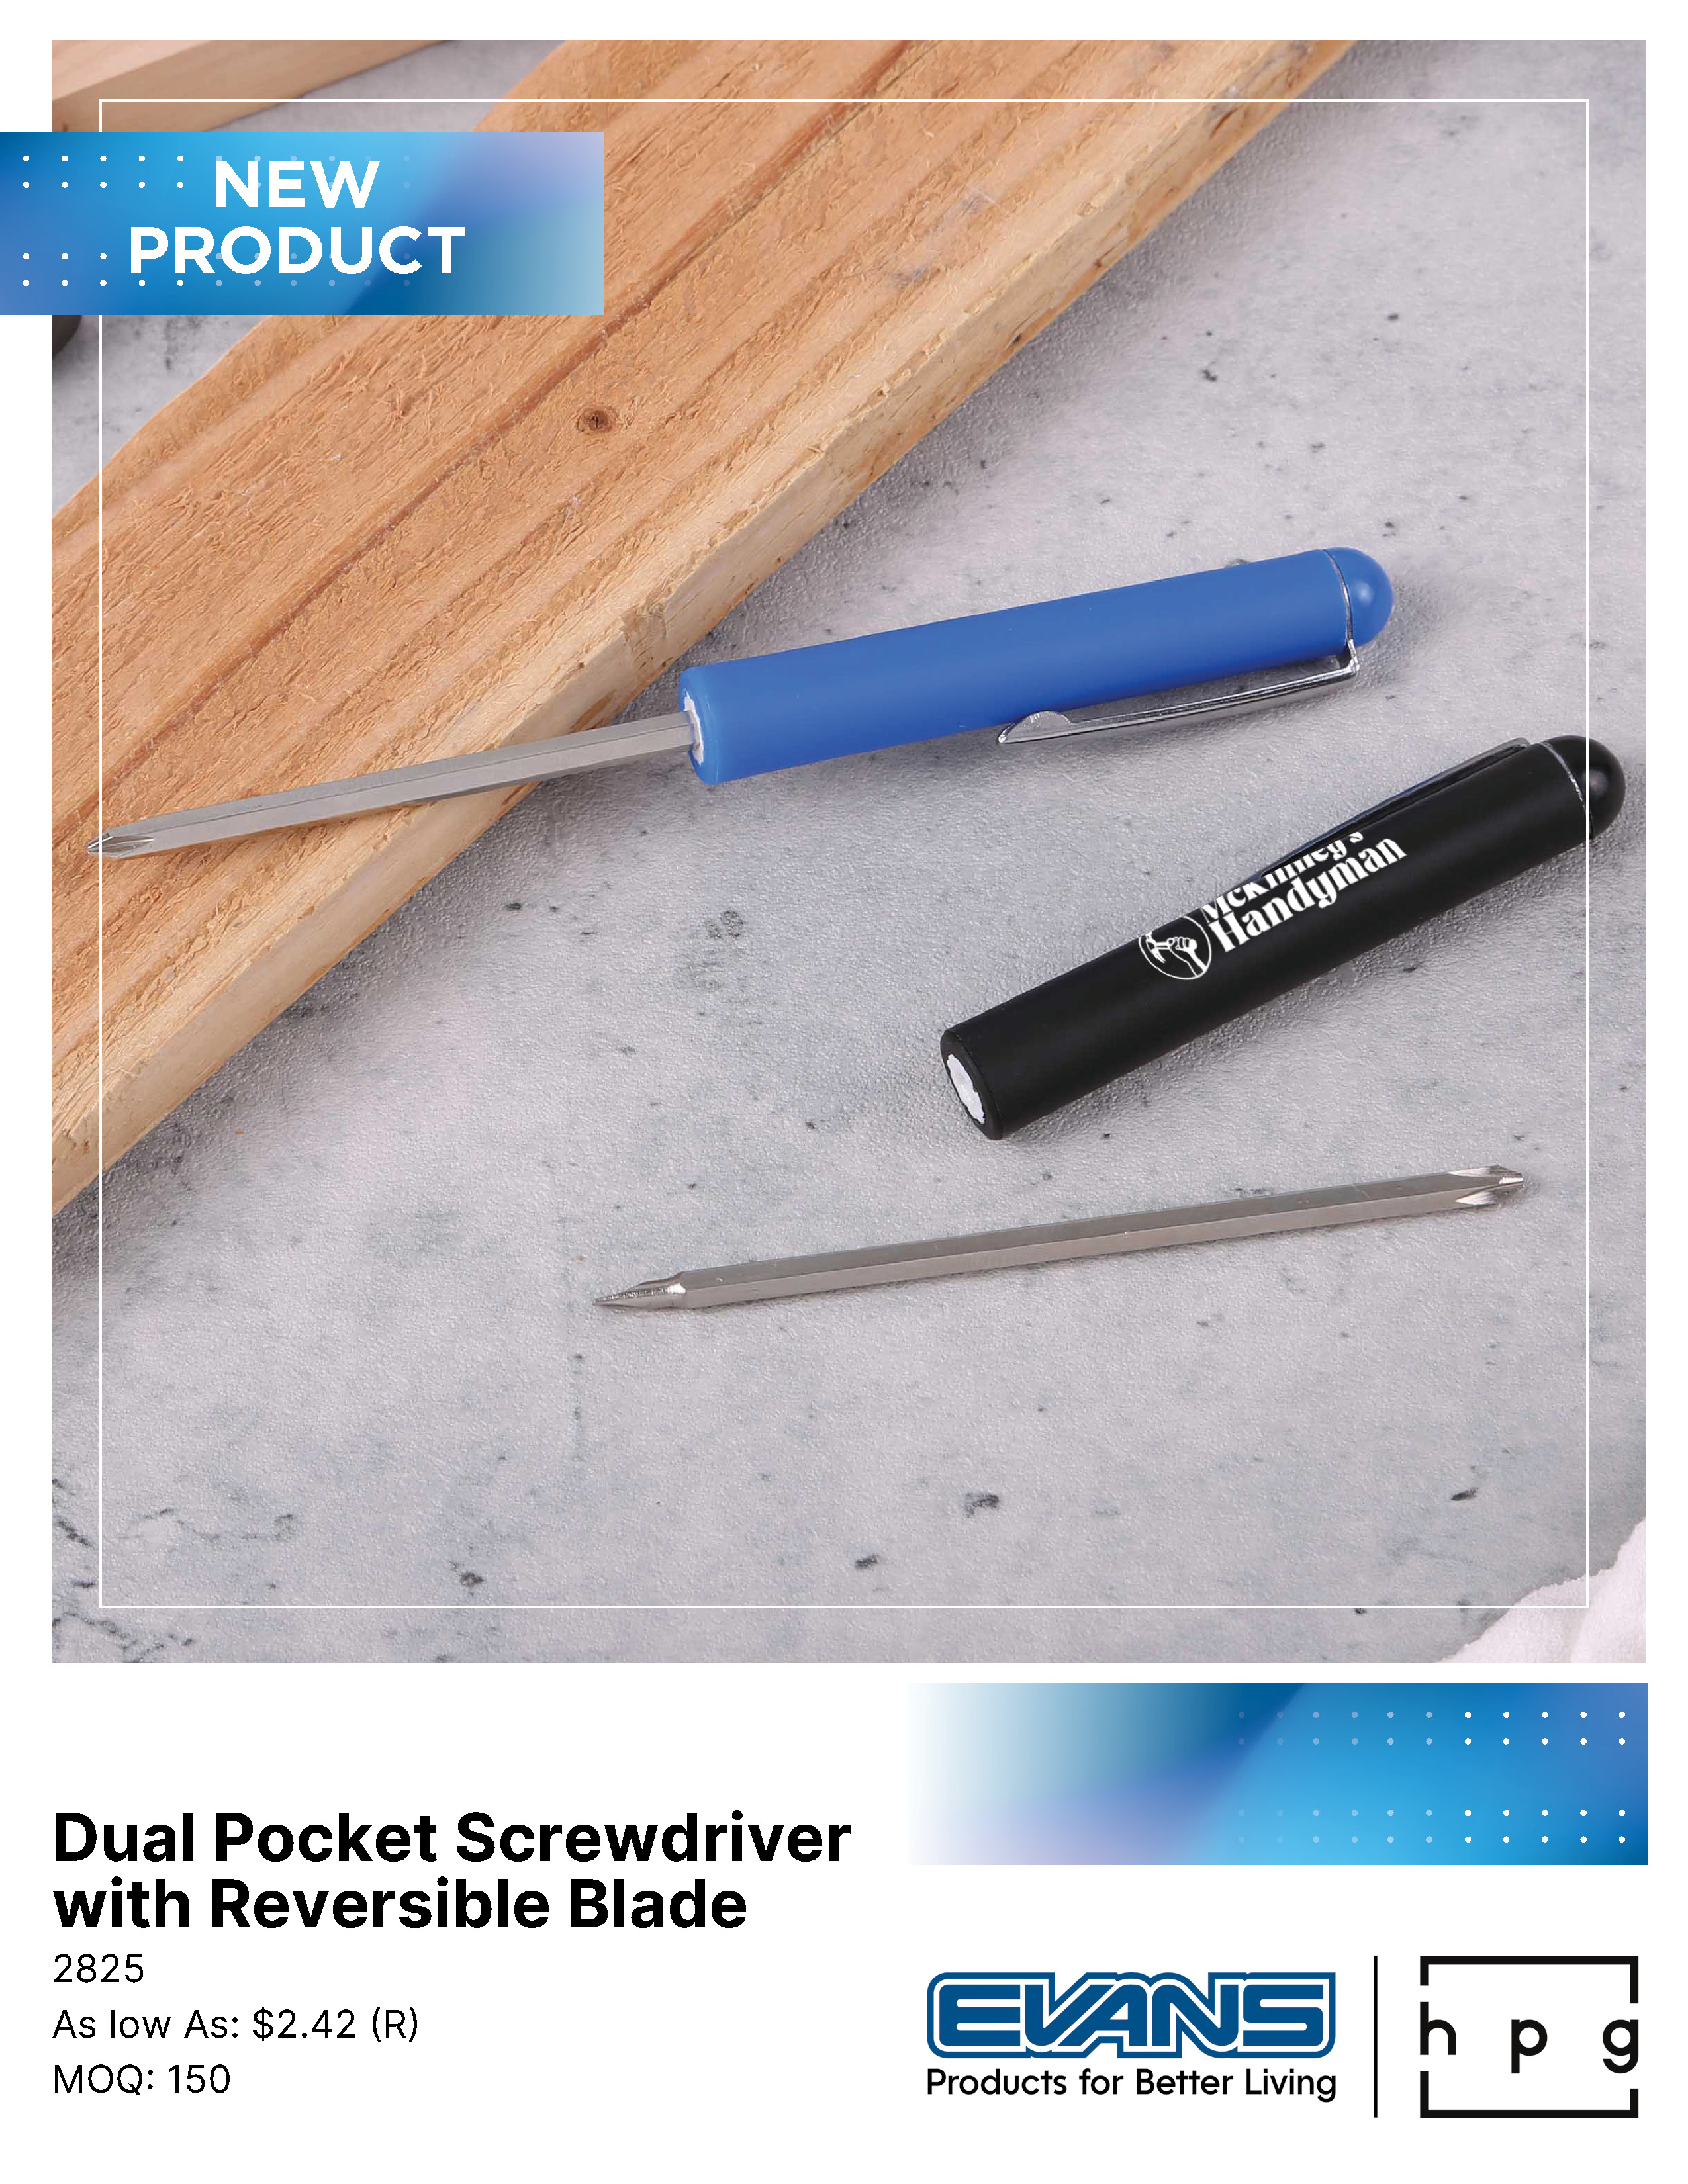 2825 Dual Pocket Screwdriver with Reversible Blade